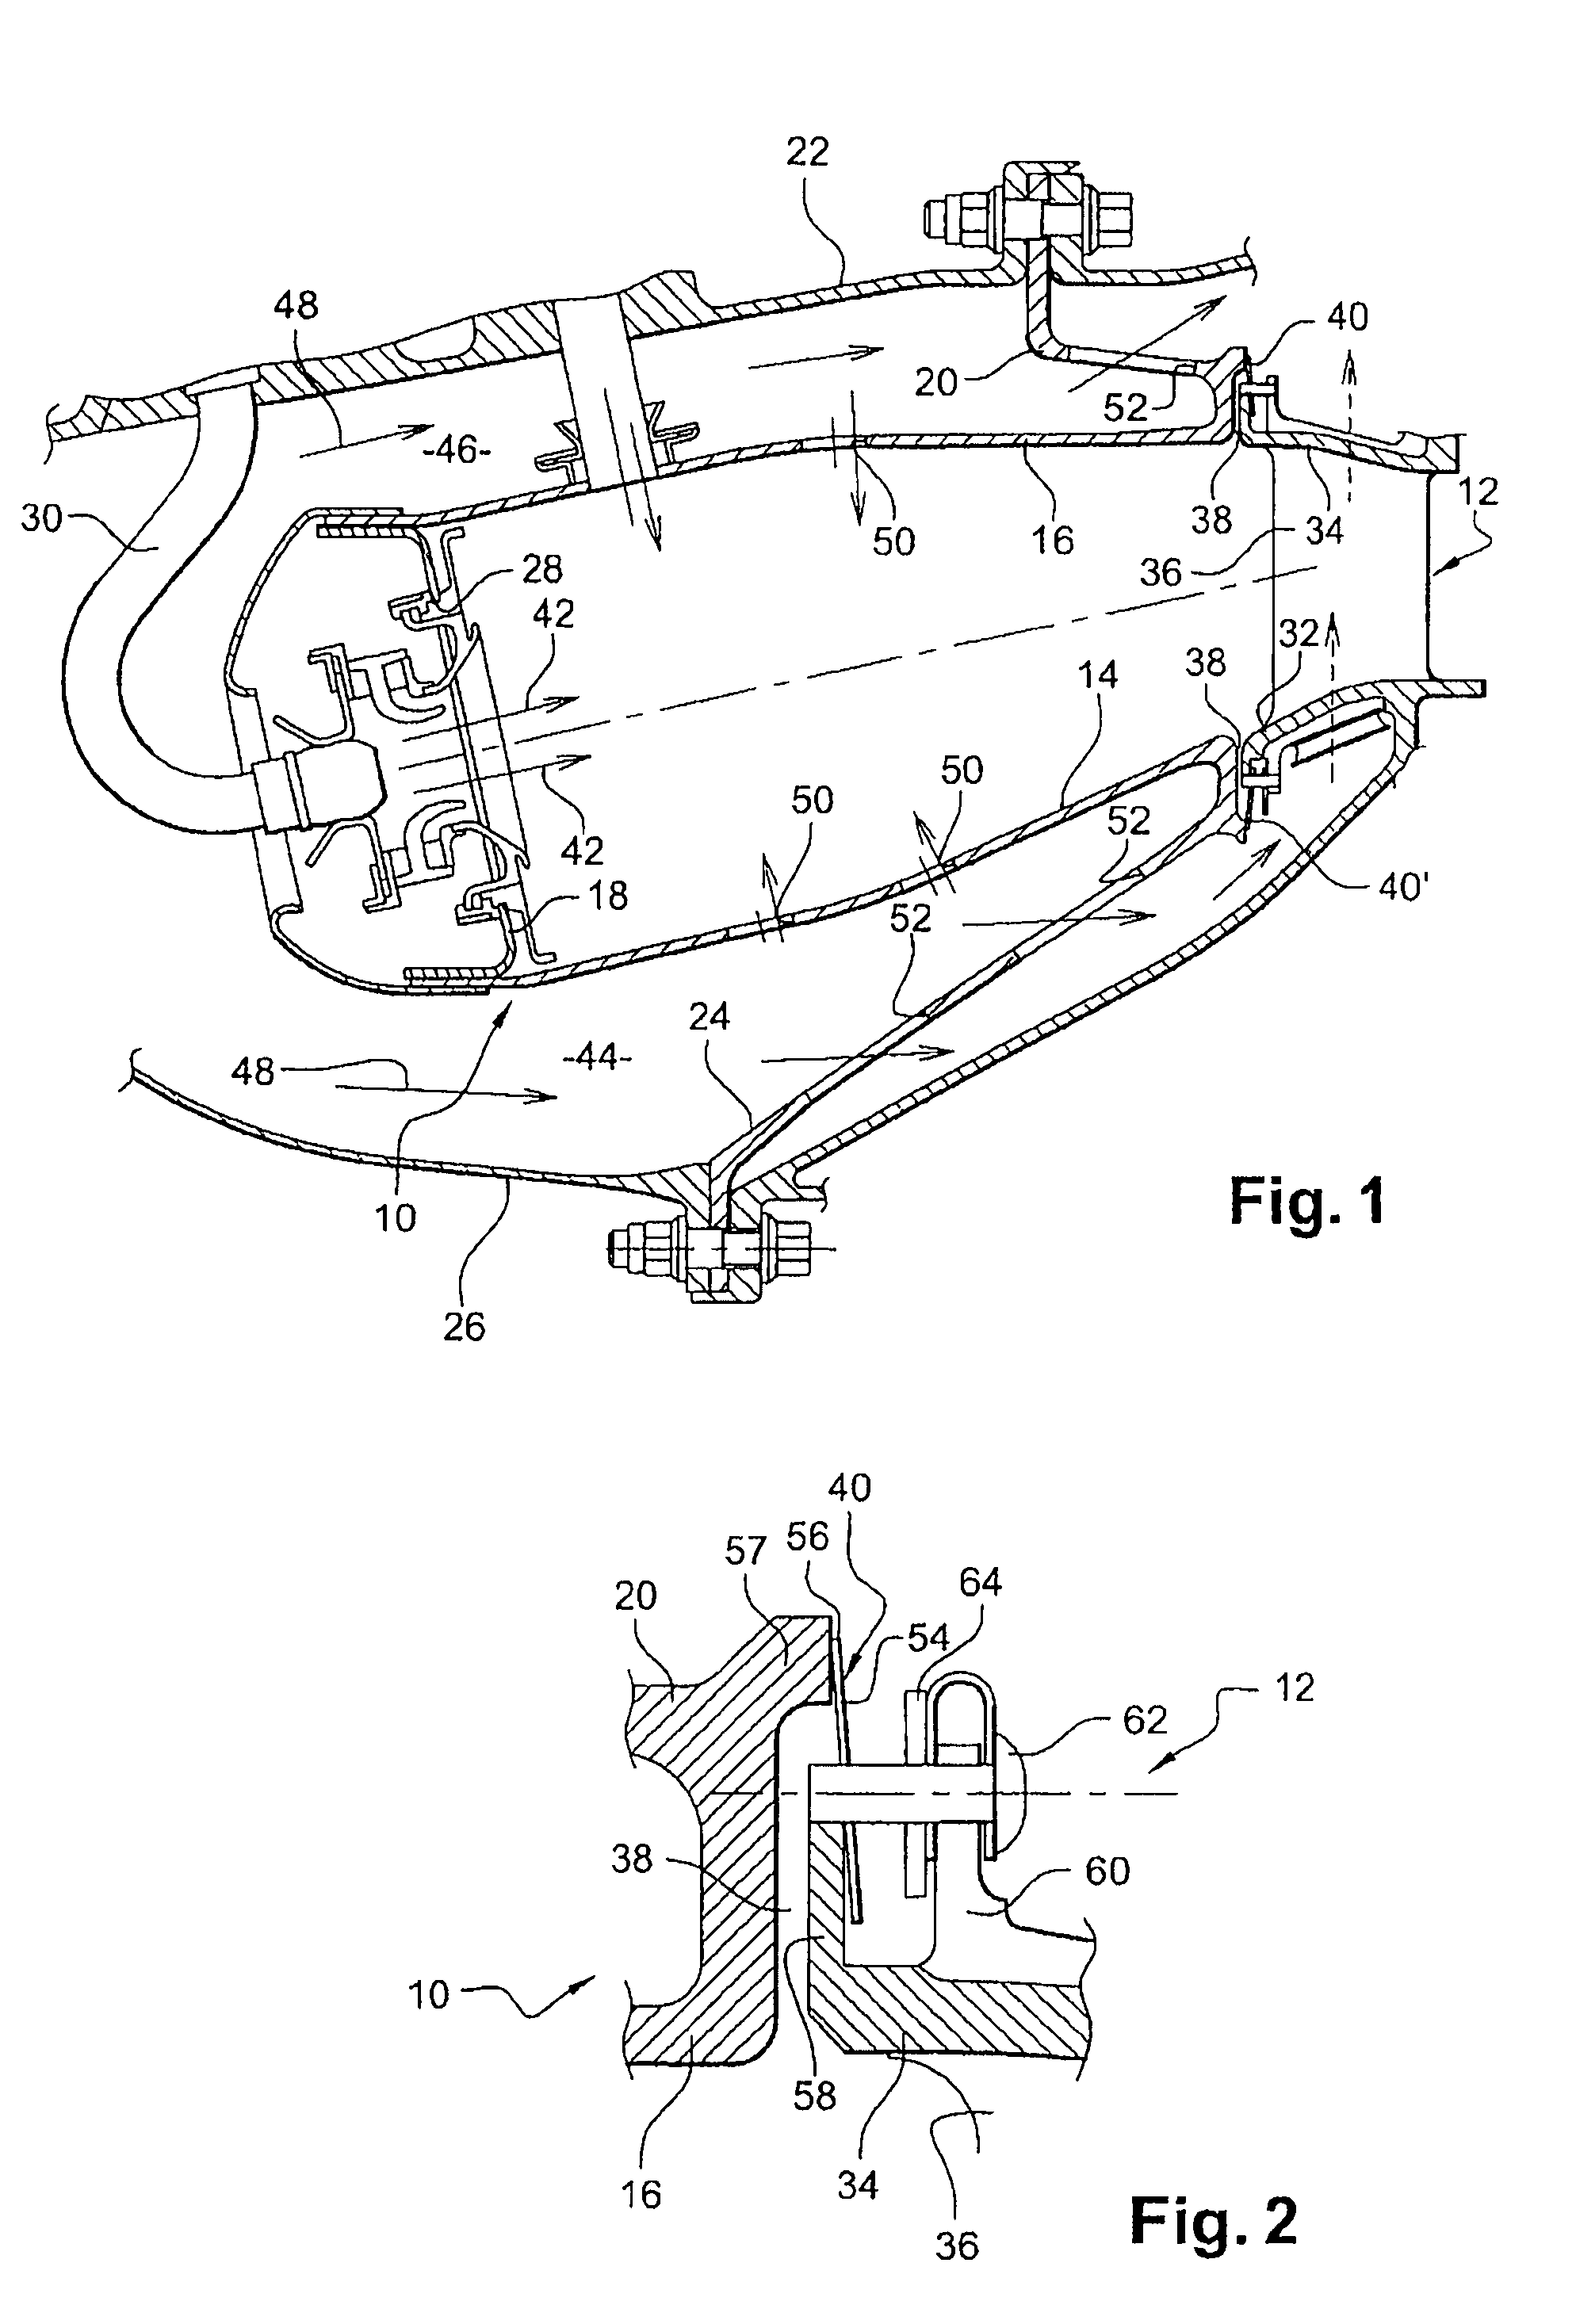 Sealing between a combustion chamber and a turbine nozzle in a turbomachine